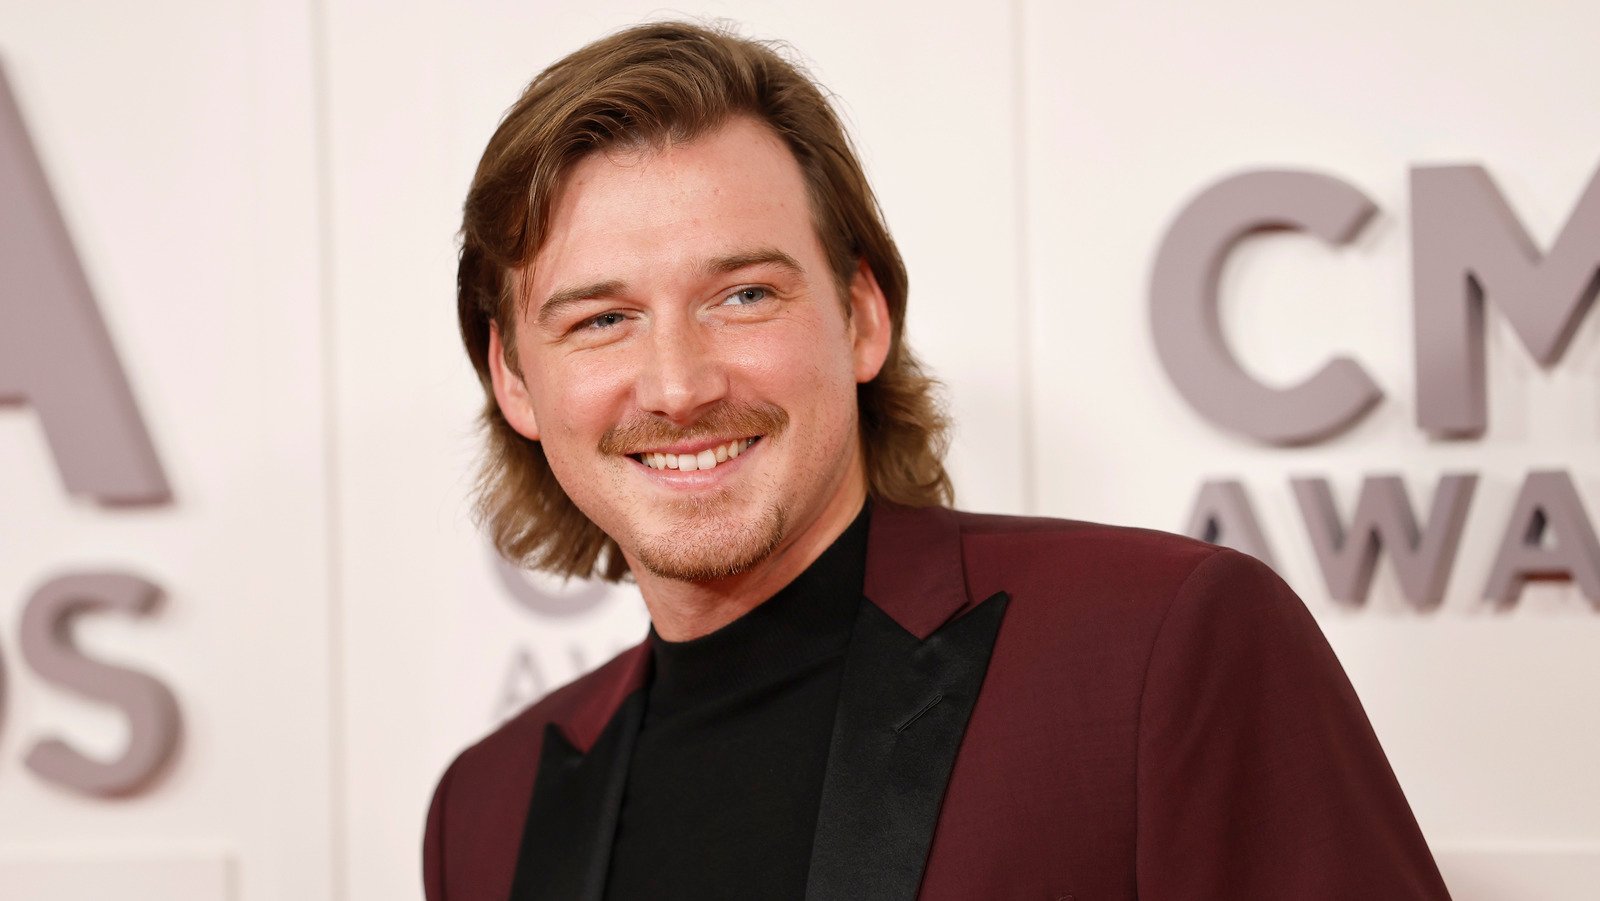 Why Morgan Wallen May Miss a Grammy Nomination: Key Factors to Consider